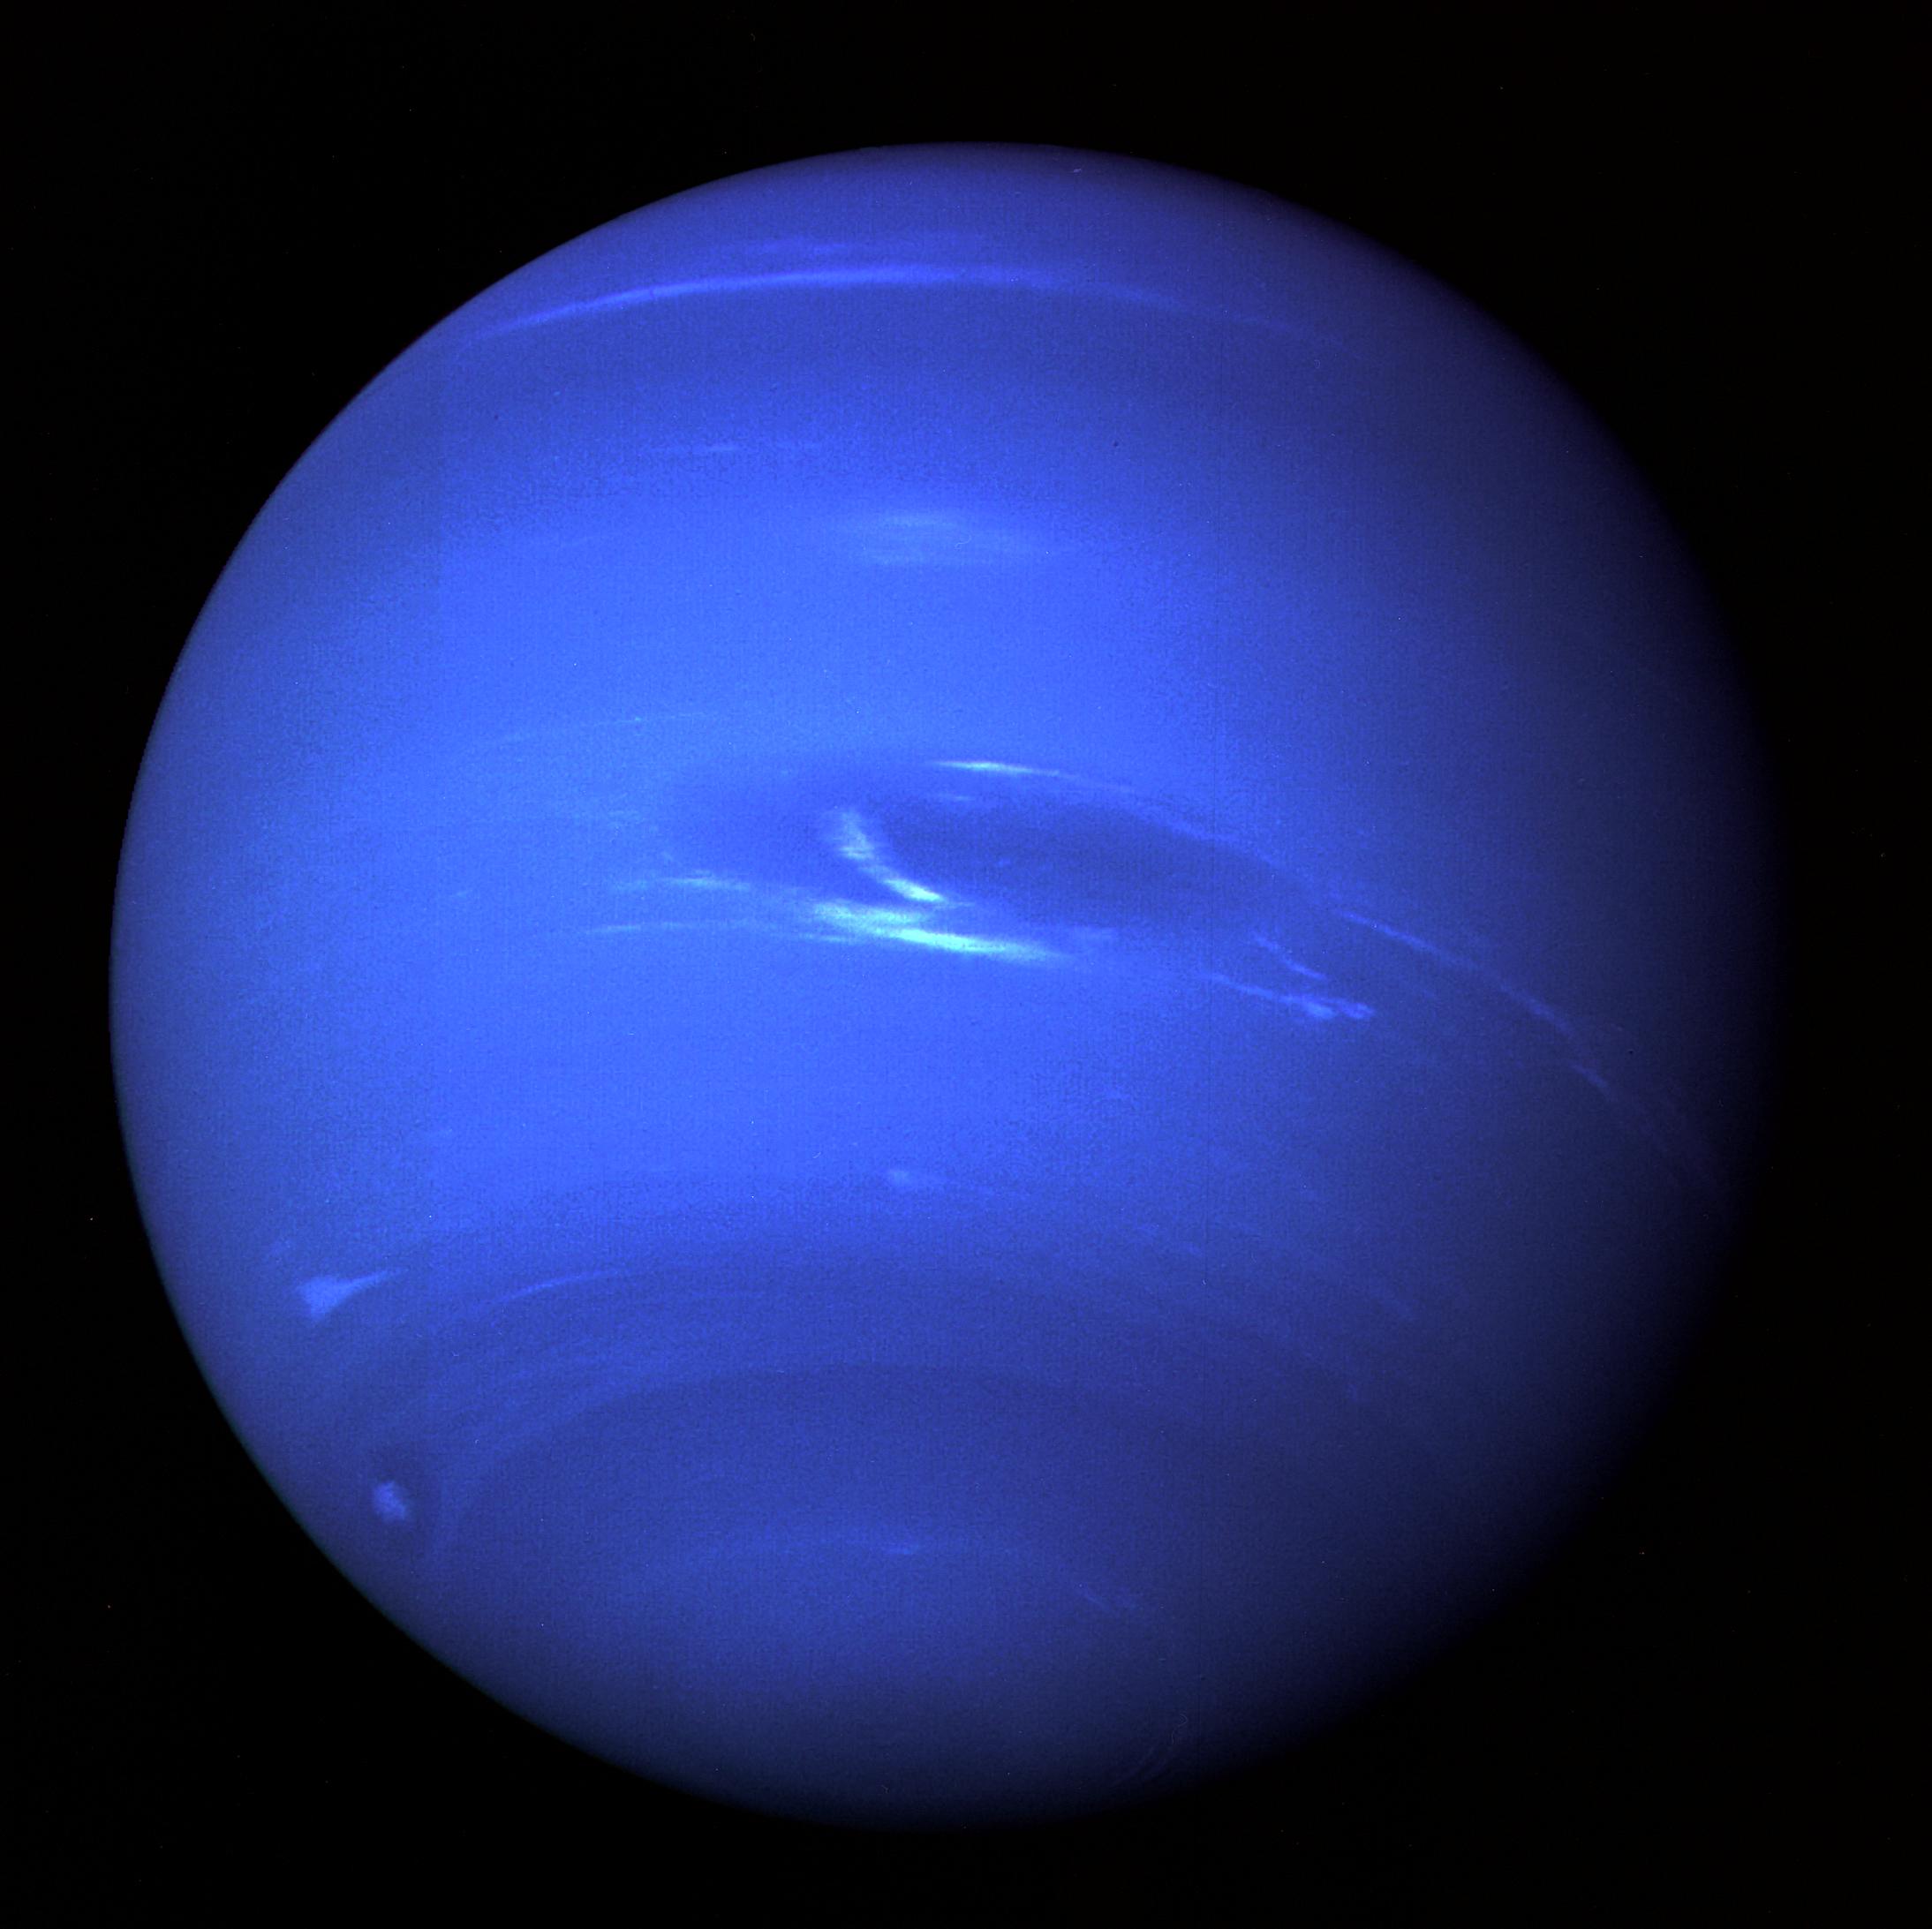 Neptune, as captured by Voyager 2 space probe